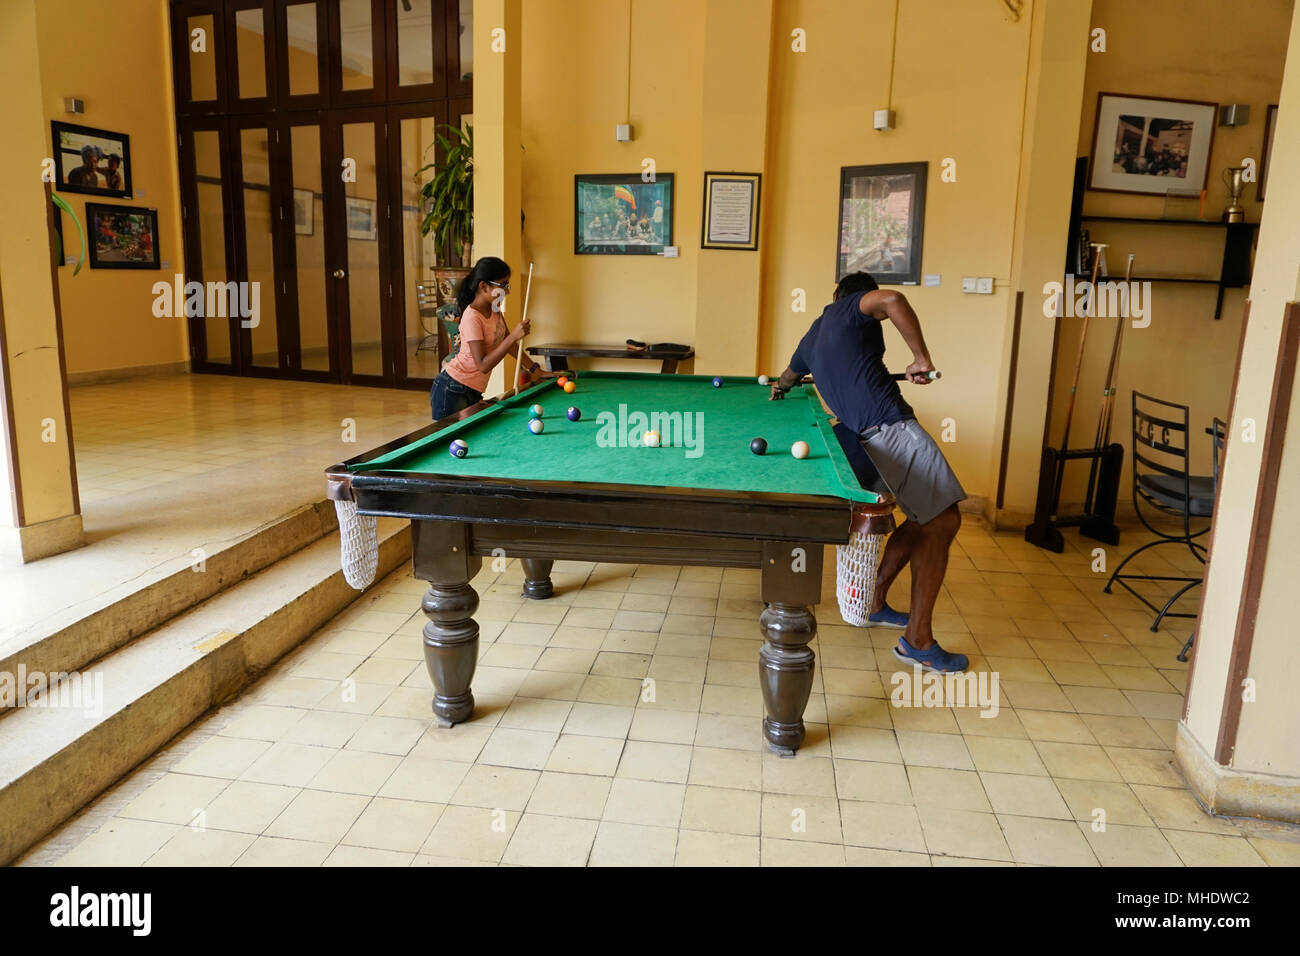 Pool table at The Foreign Correspondents' Club in Phnom Penh, capital of Cambodia, Phnom Penh city, Cambodia Stock Photo